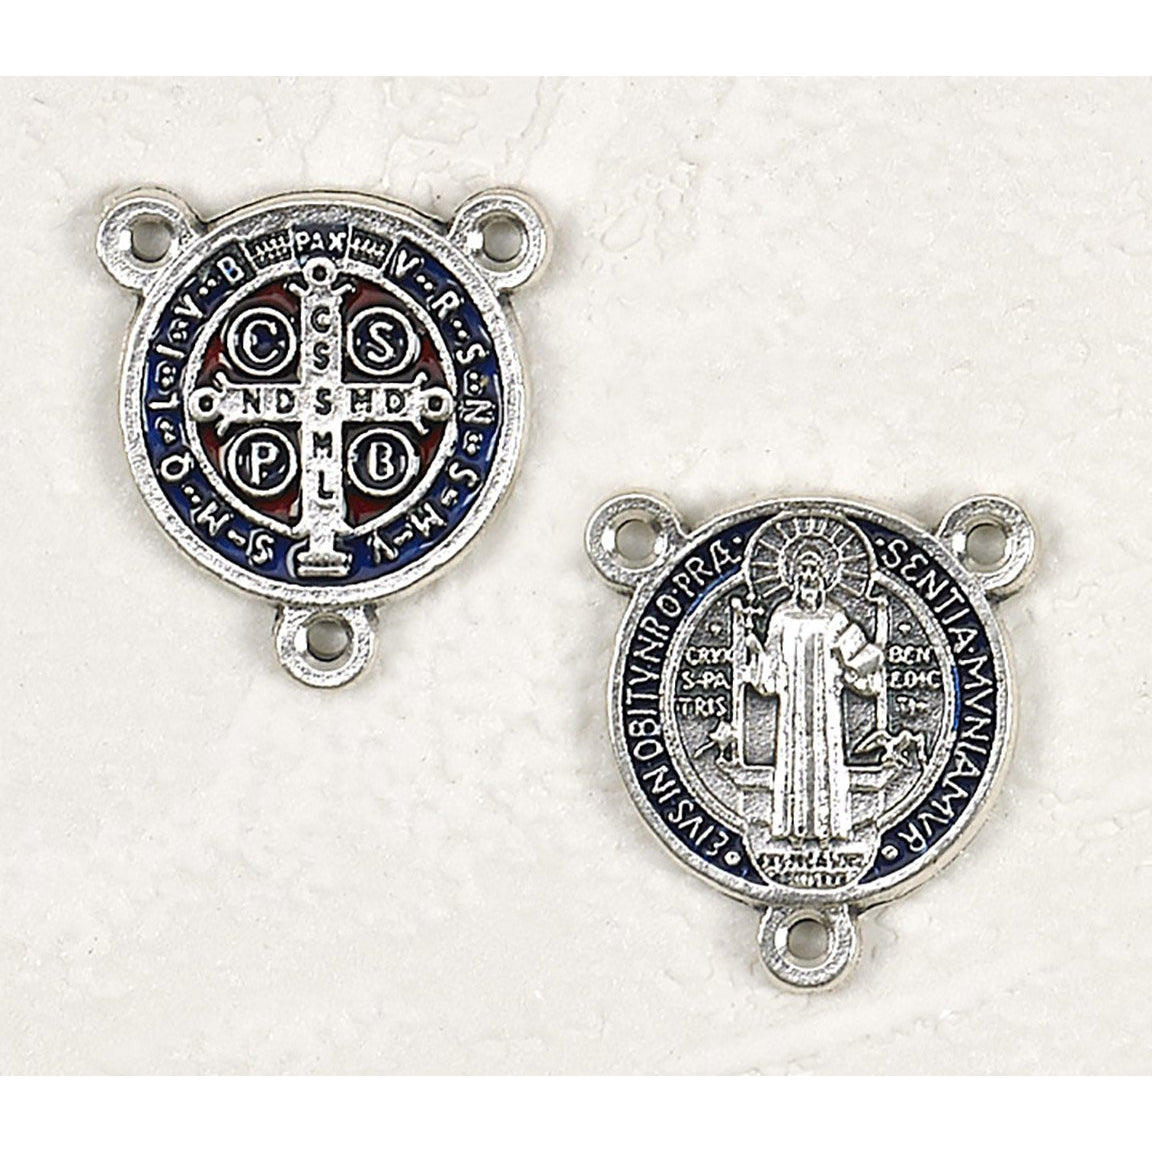 Gold, Silver and Colored Enamel Saint Benedict Medals